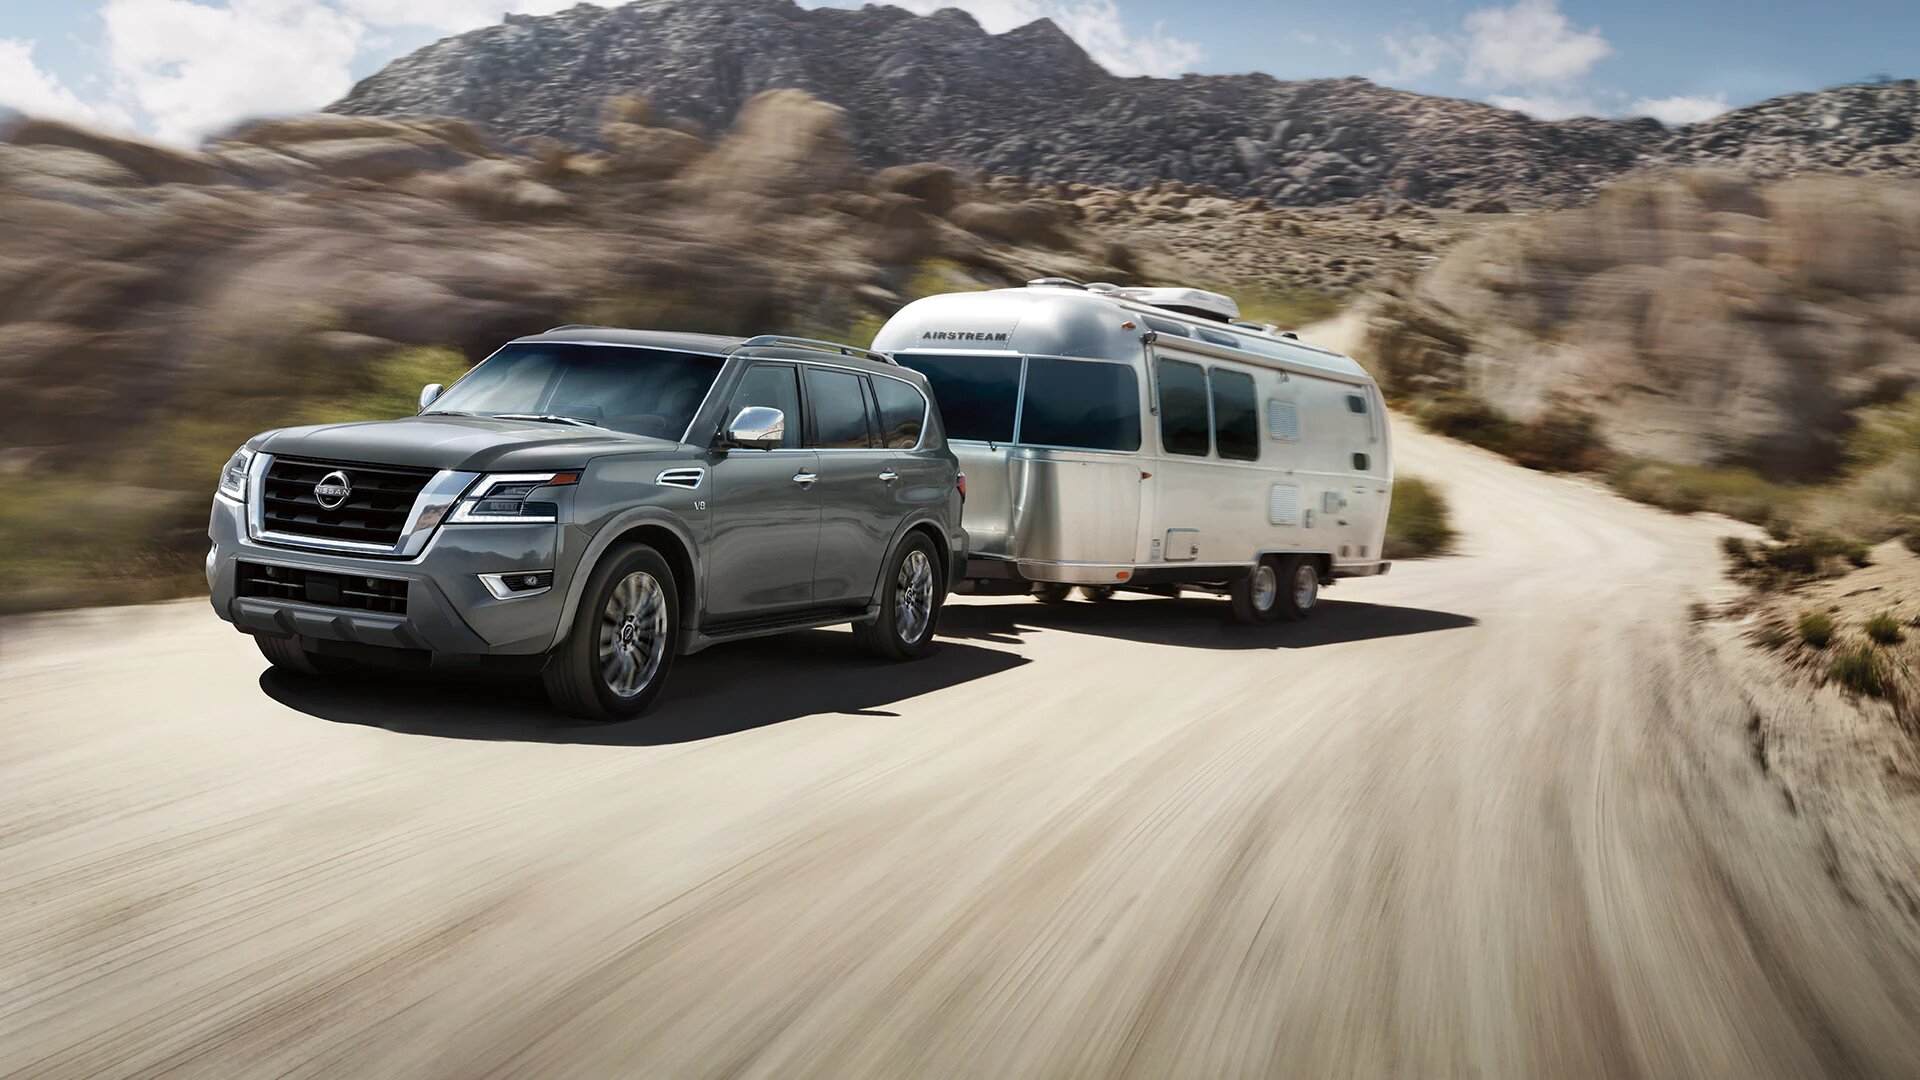 Find the perfect used Nissan Armada for your needs at Nissan of Cool Springs. We have a vast selection of used 2019 Nissan Armada, 2015 Nissan Armada,2021 Nissan Armada, 2020 Nissan Armada, and 2013 Nissan Armada models available.